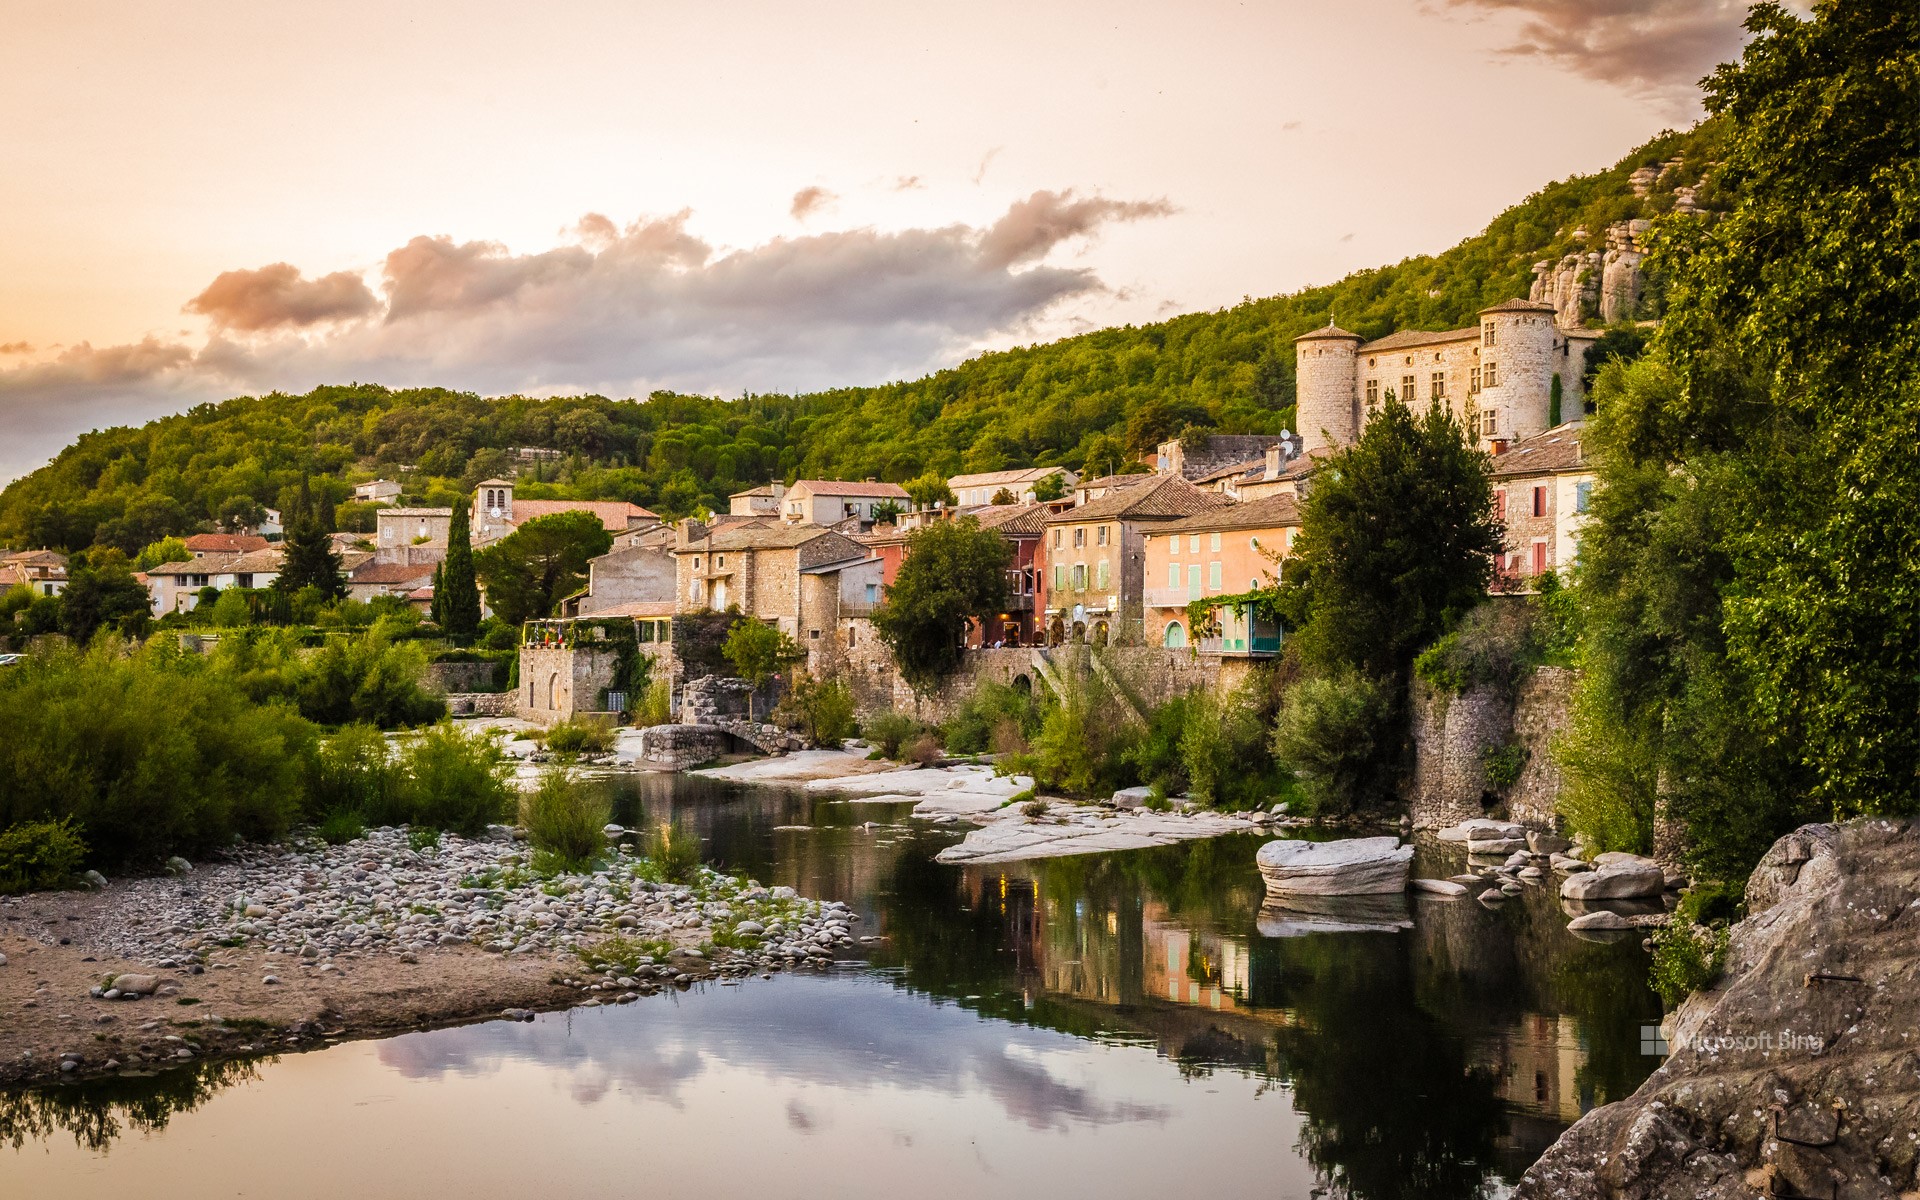 The Ardèche and the village of Vogüé at sunset